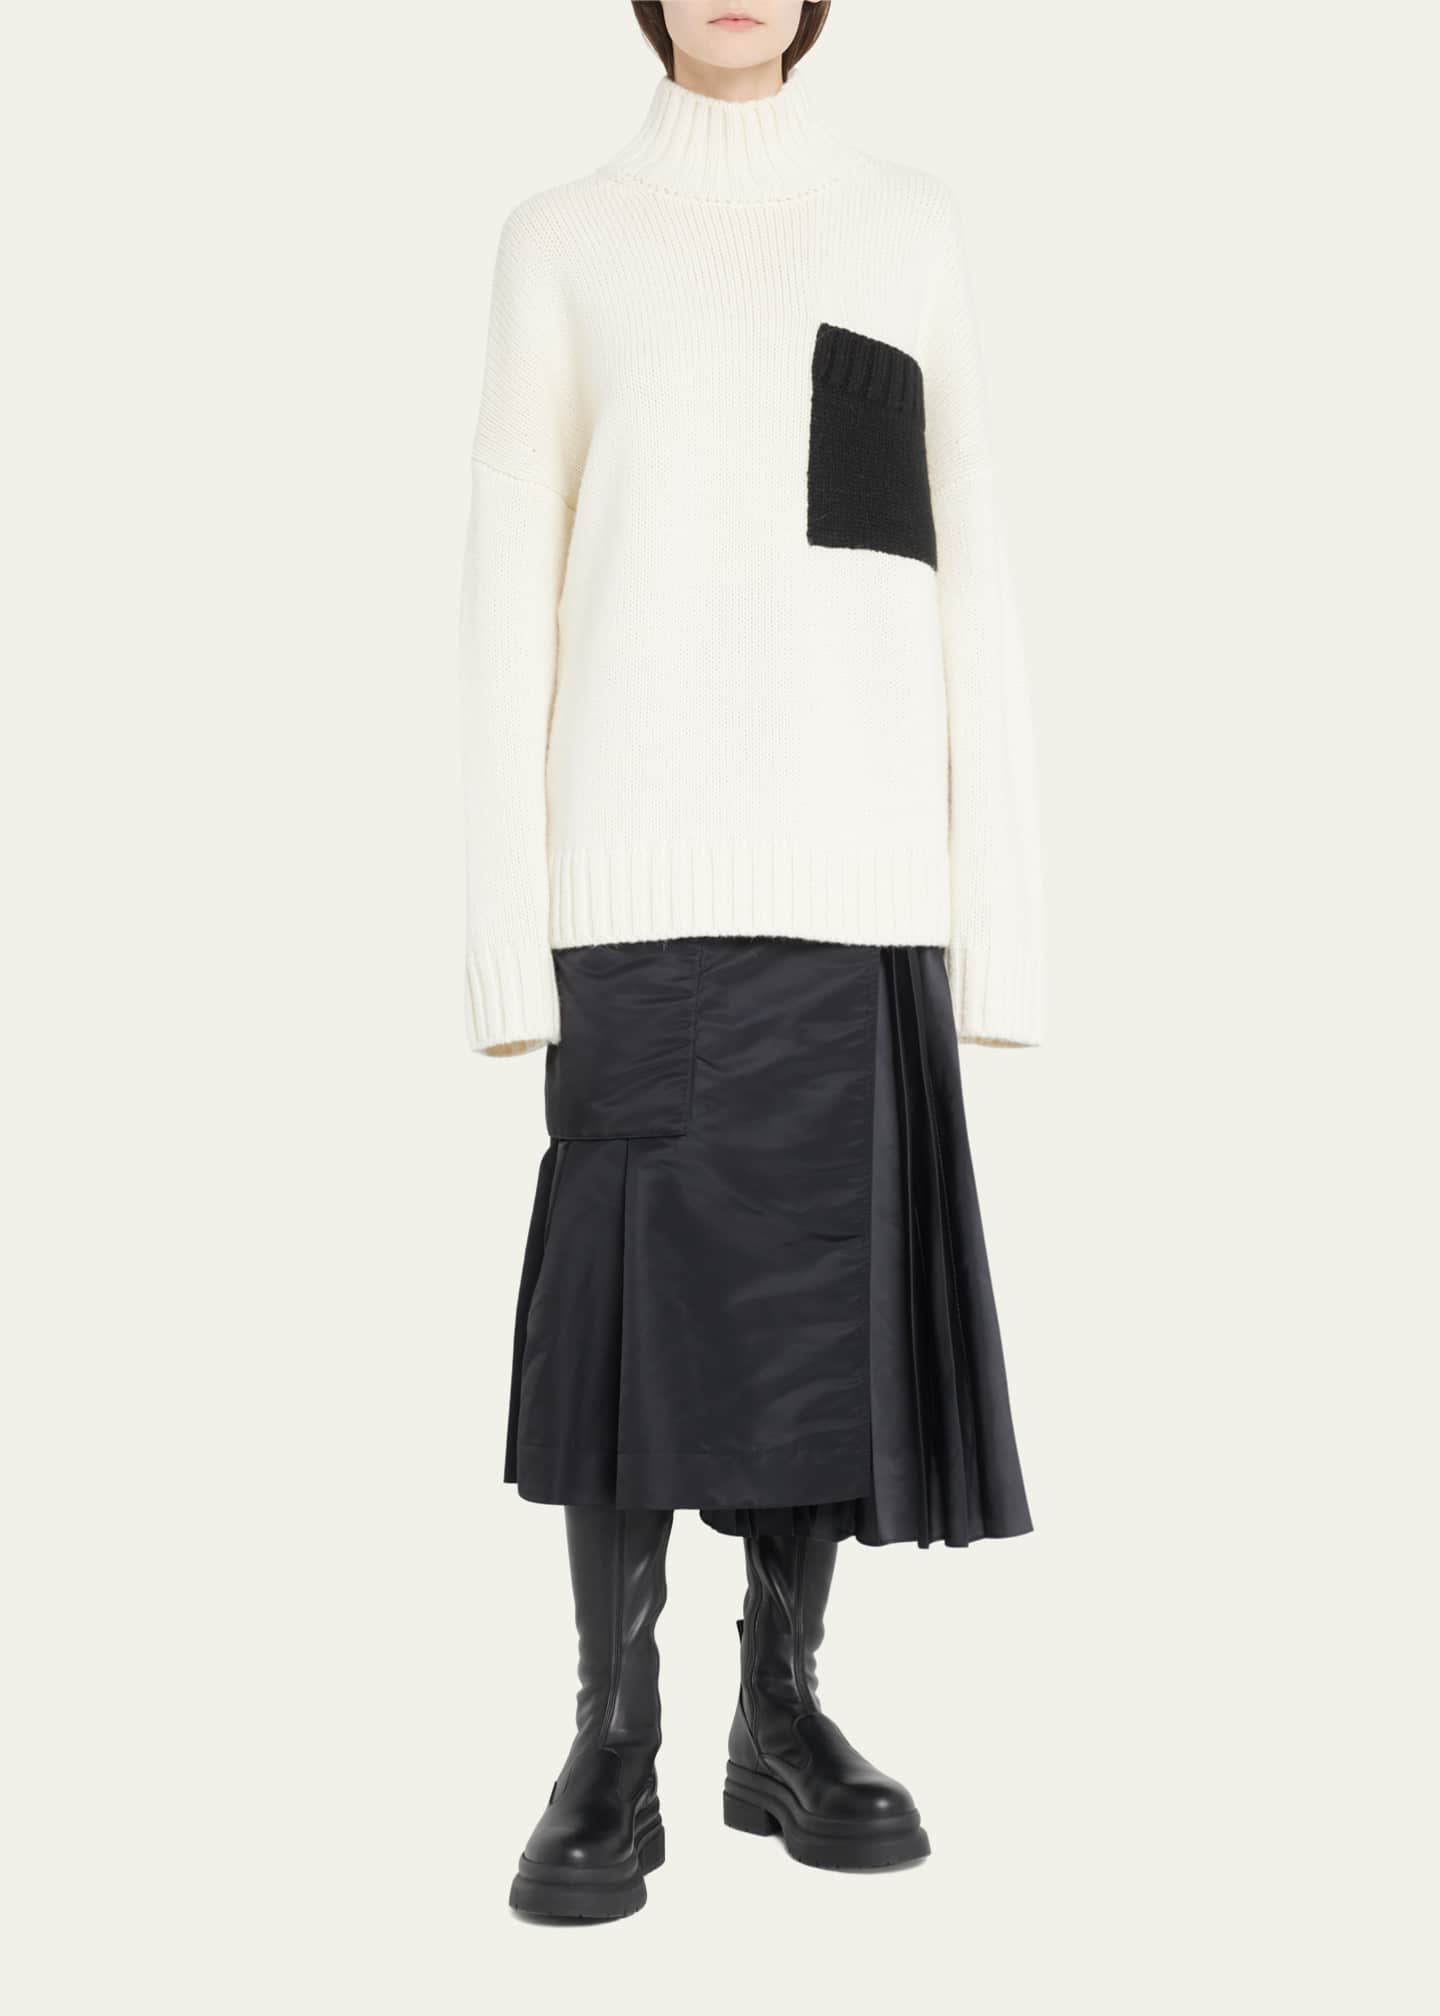 JW Anderson Leather Over-The-Knee Legging Boots - Bergdorf Goodman